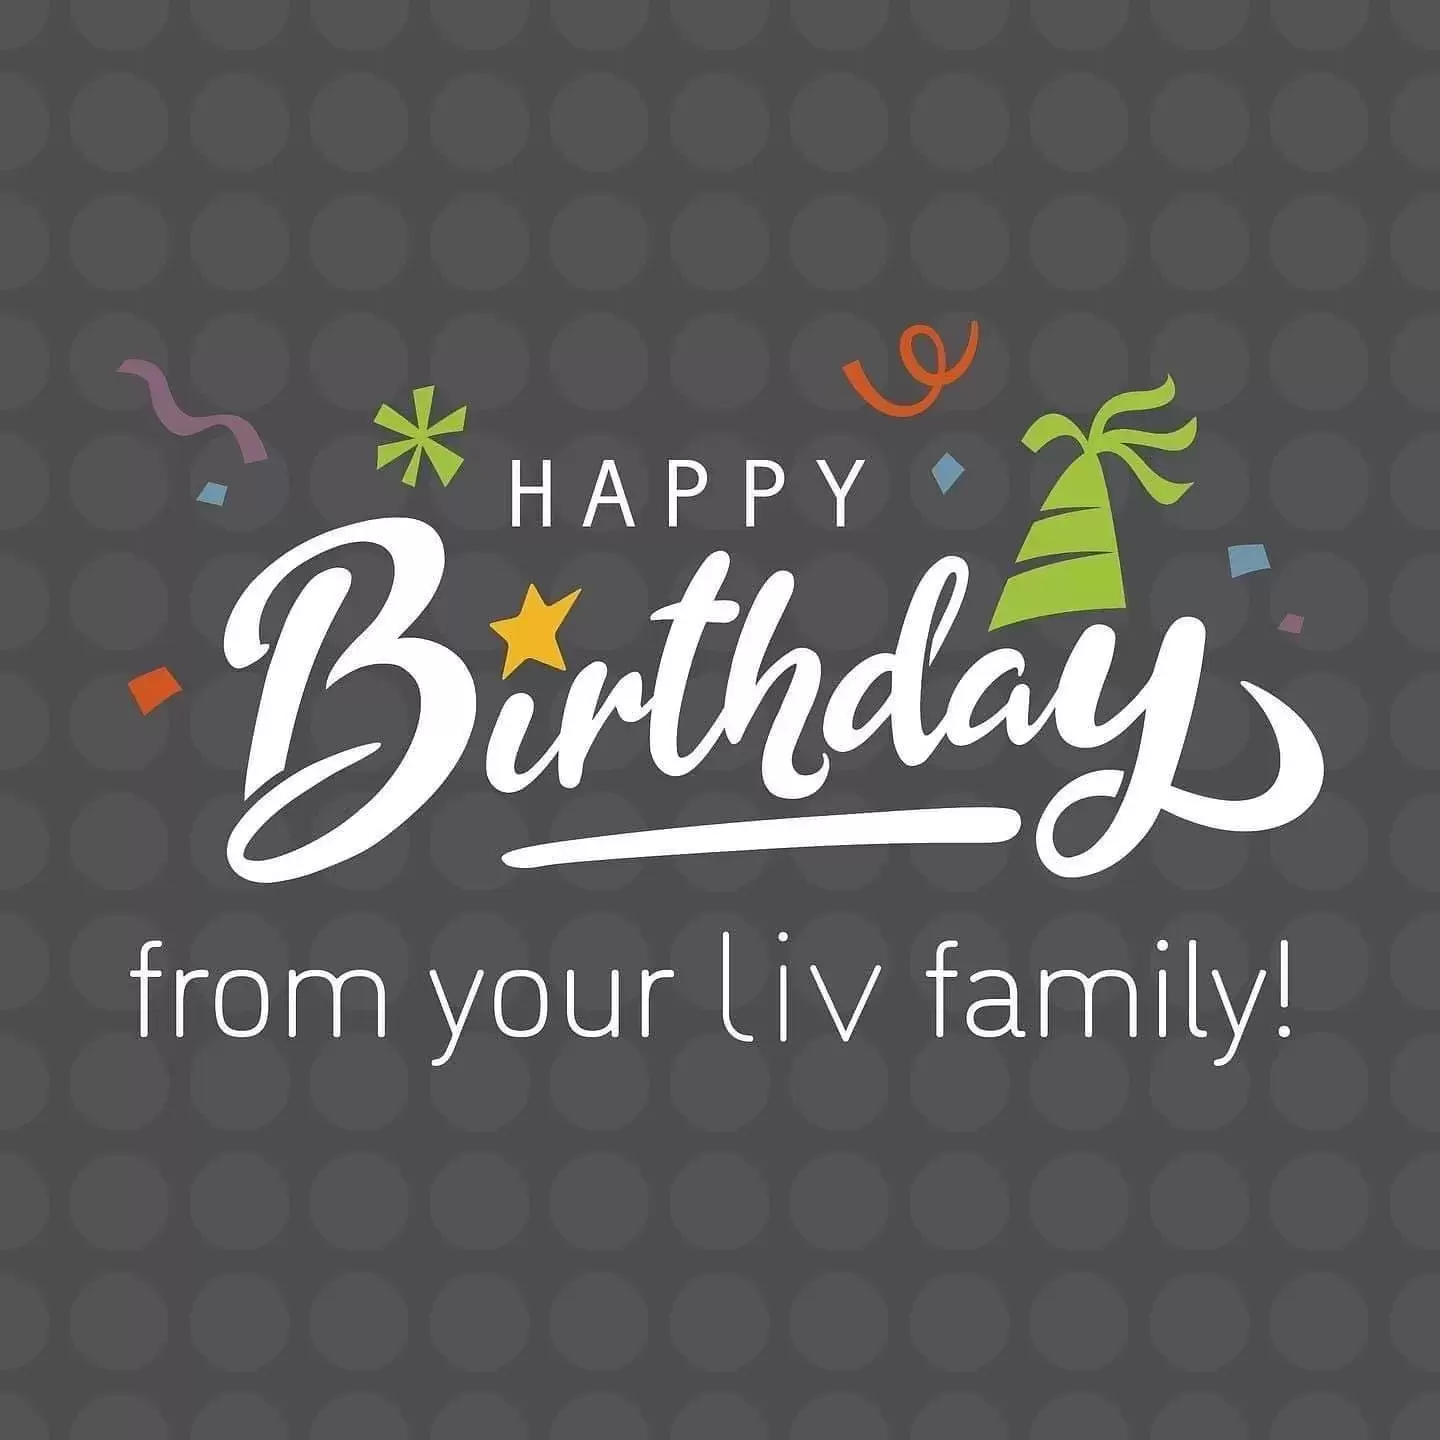 Happy Birthday to our Senior Leasing Consultant, Lexi! 🥳

#LivLikeNoOther